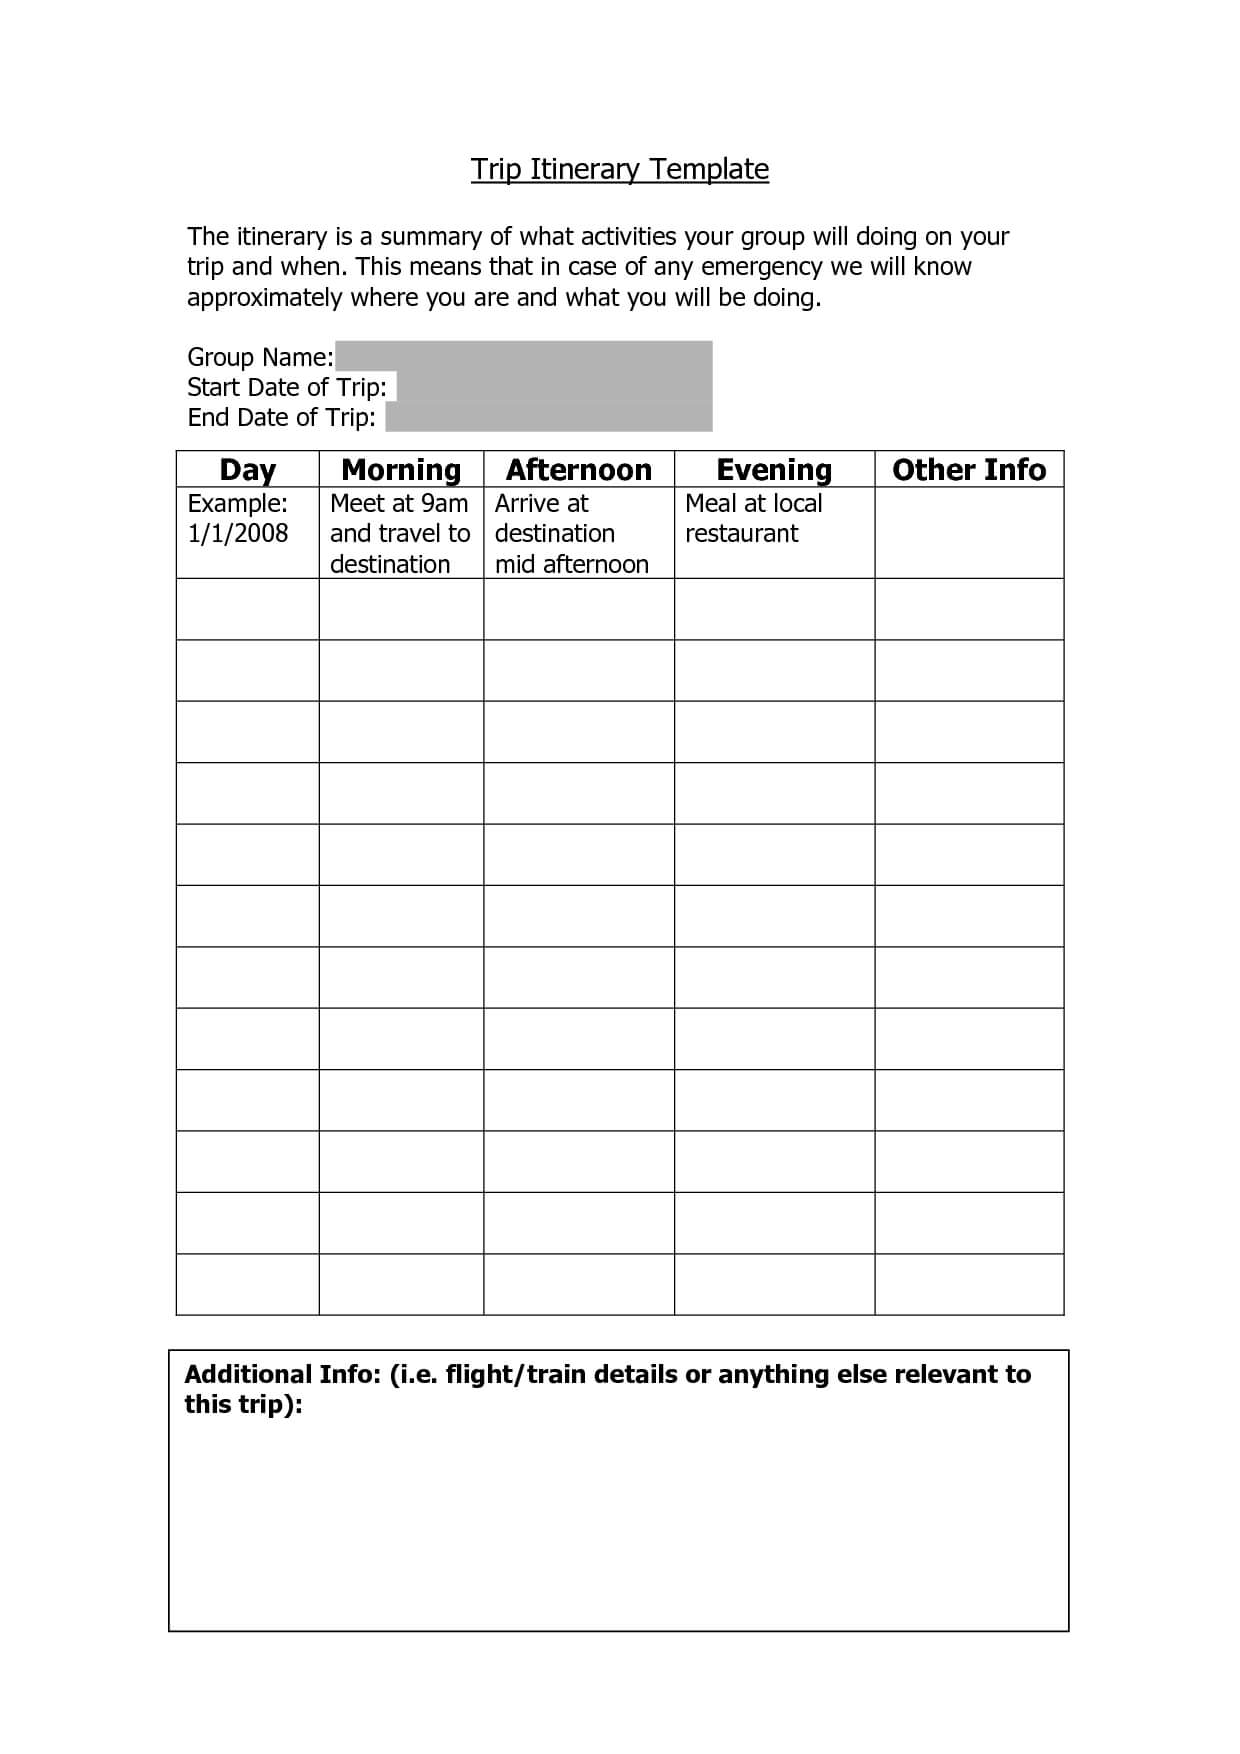 Vacation Itenerary Template | Trip Itinerary Template | My With Travel Brochure Template Ks2